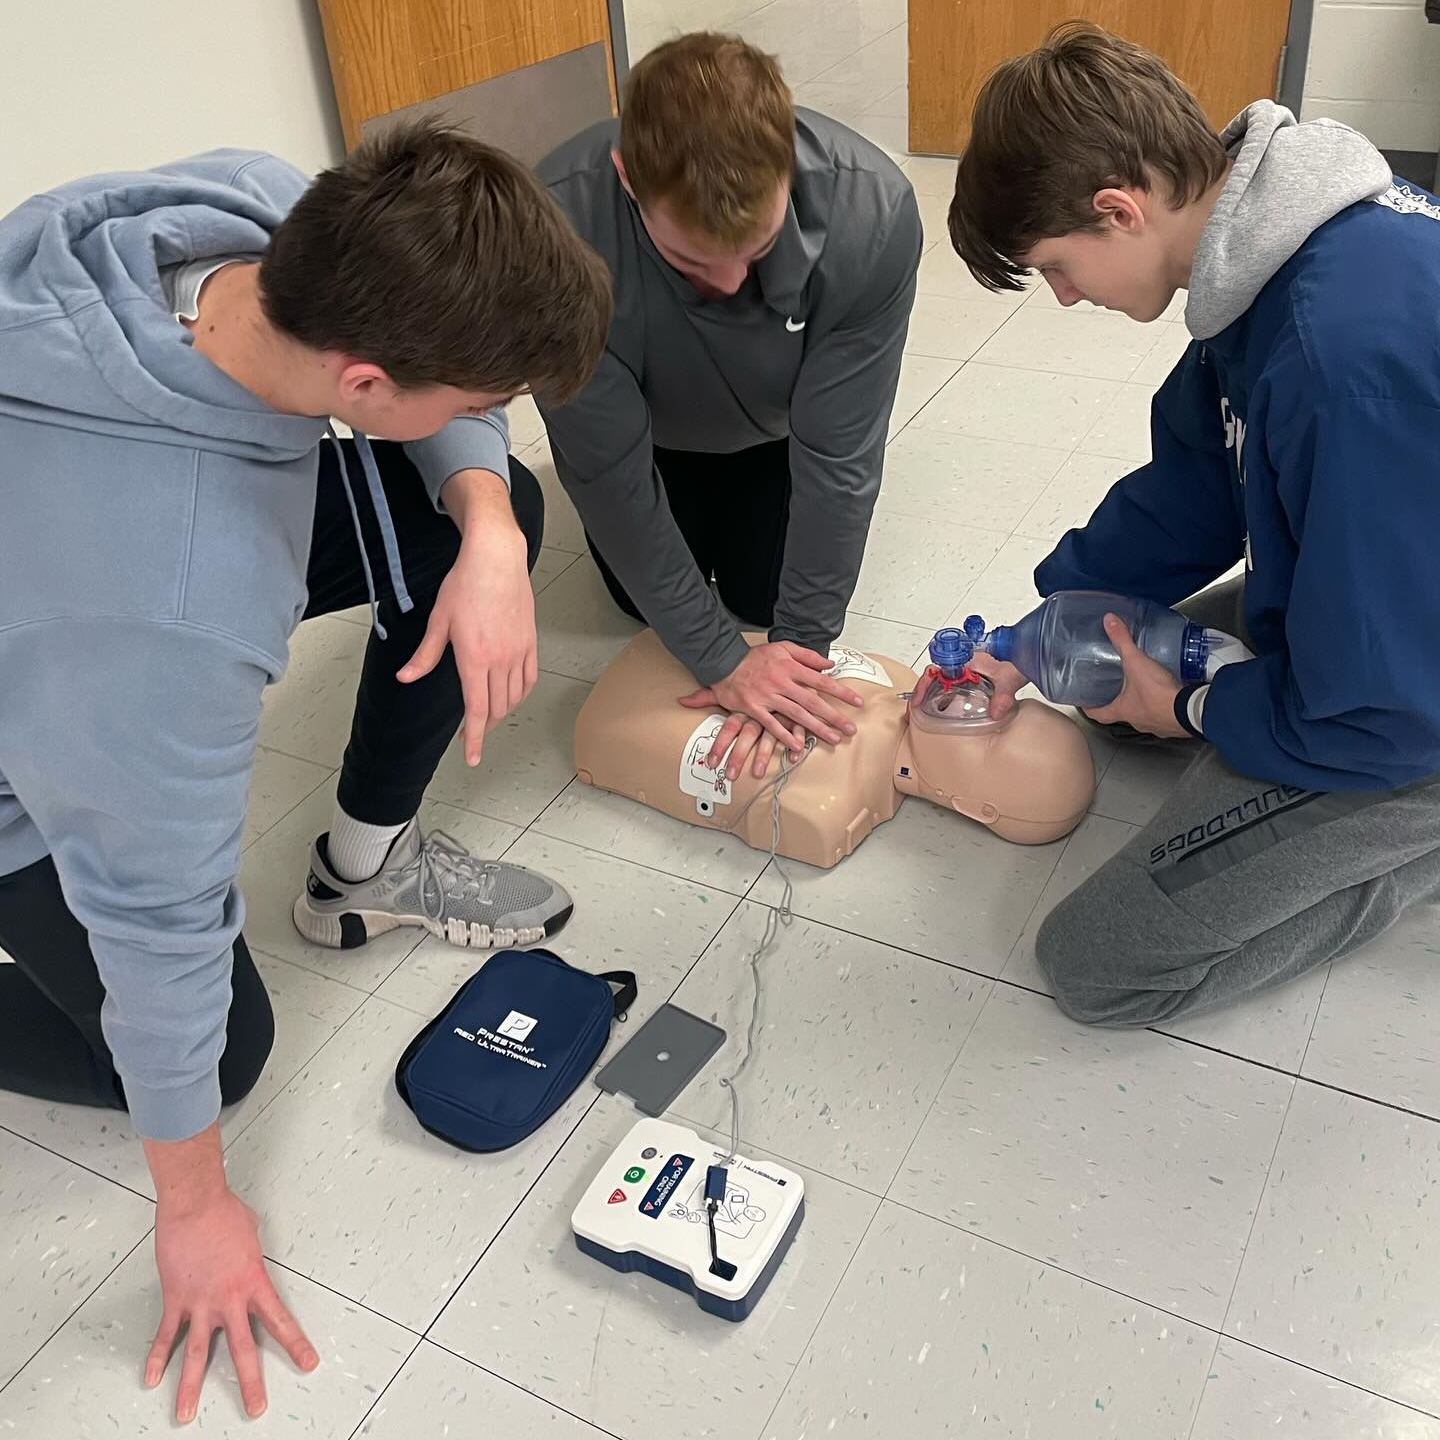 CPR and students